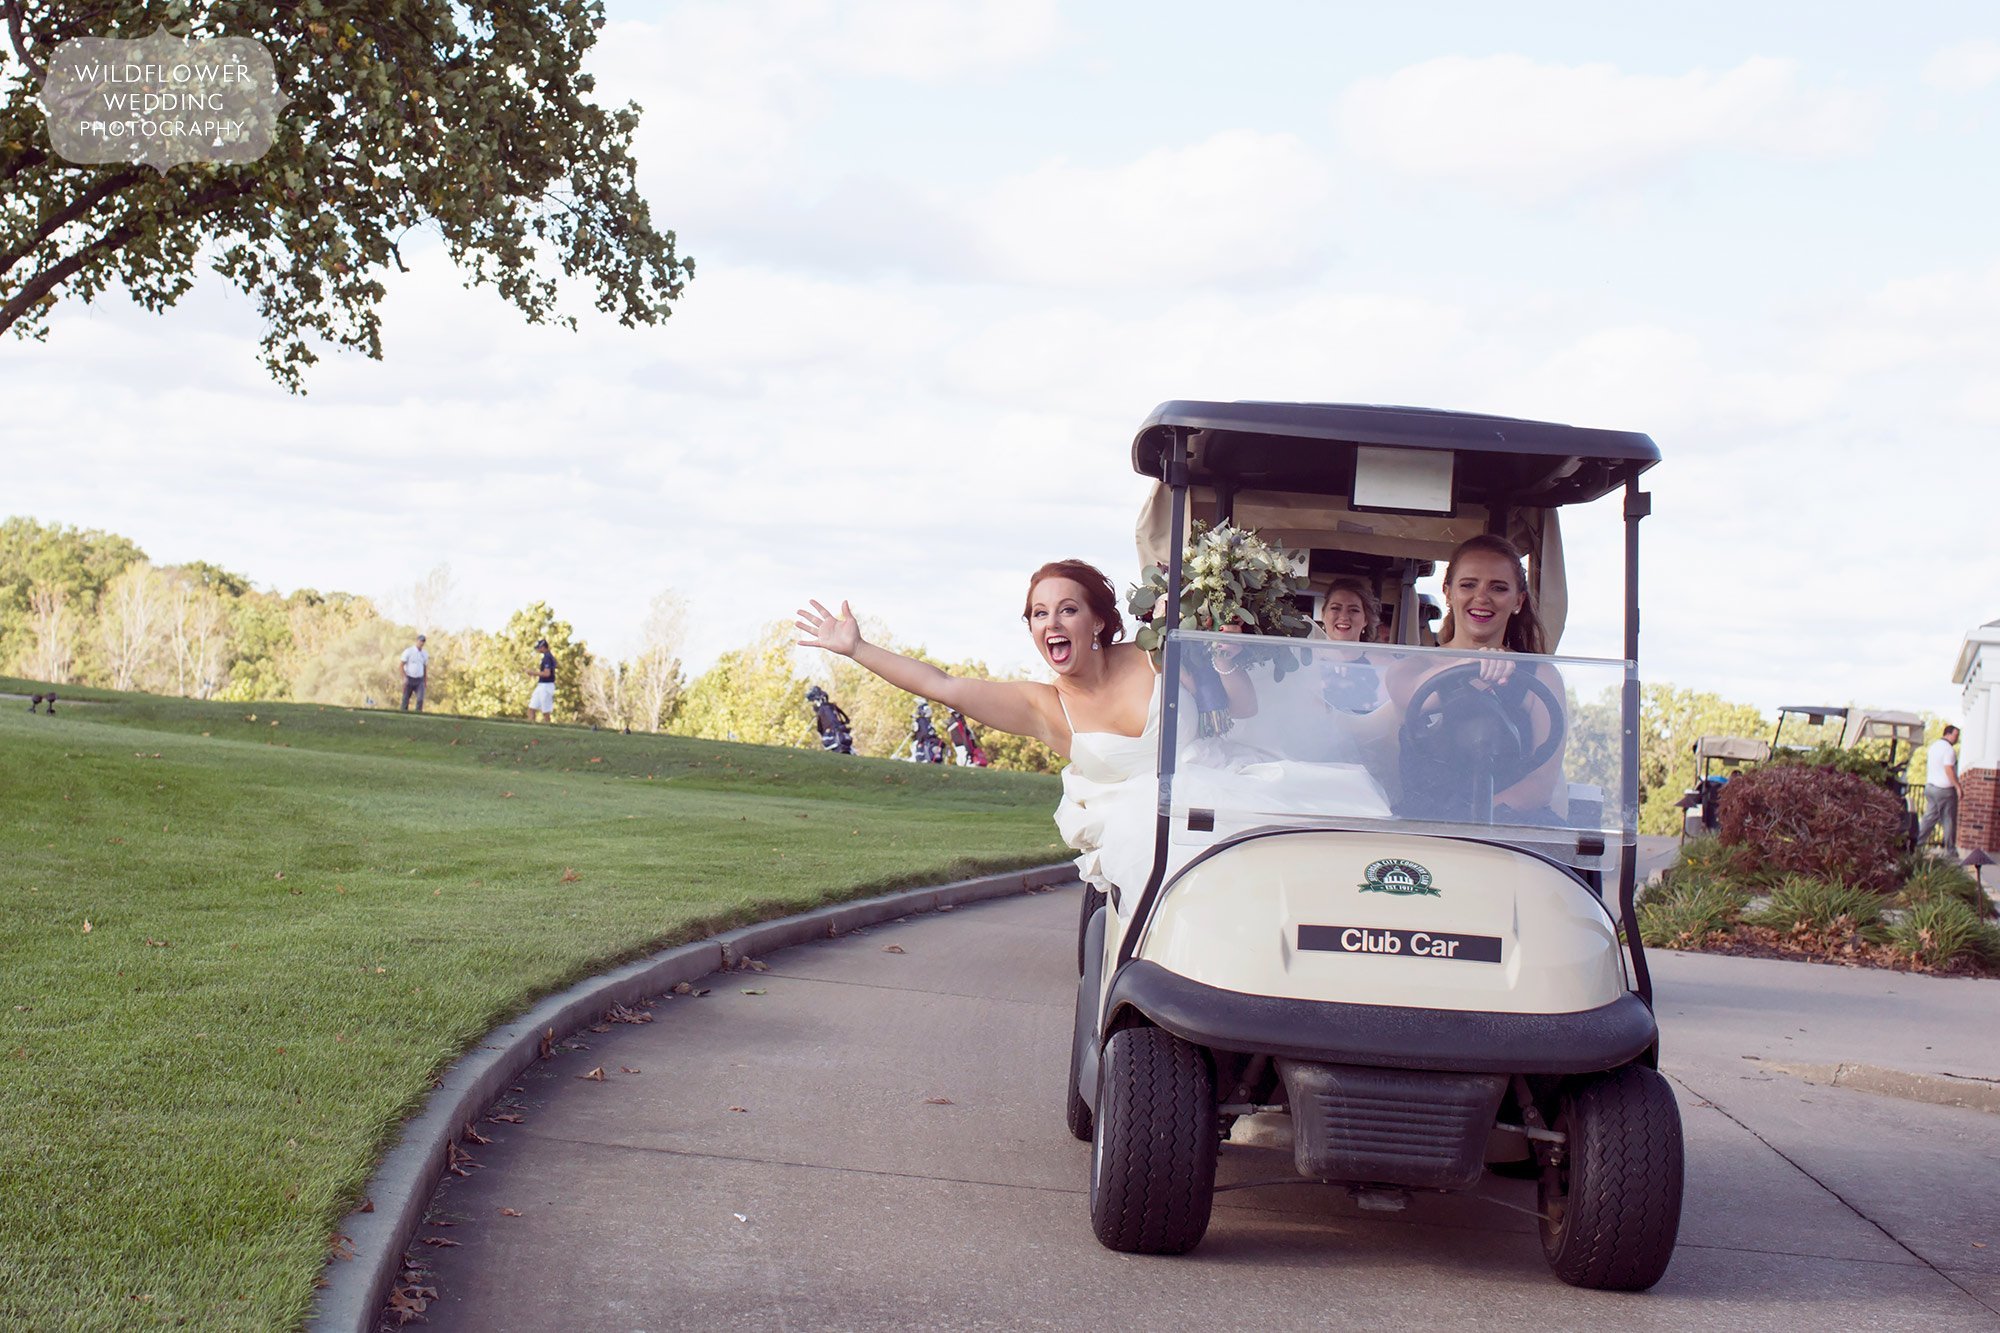 The bride smiling while riding in a golf cart at the Jefferson City Country Club.